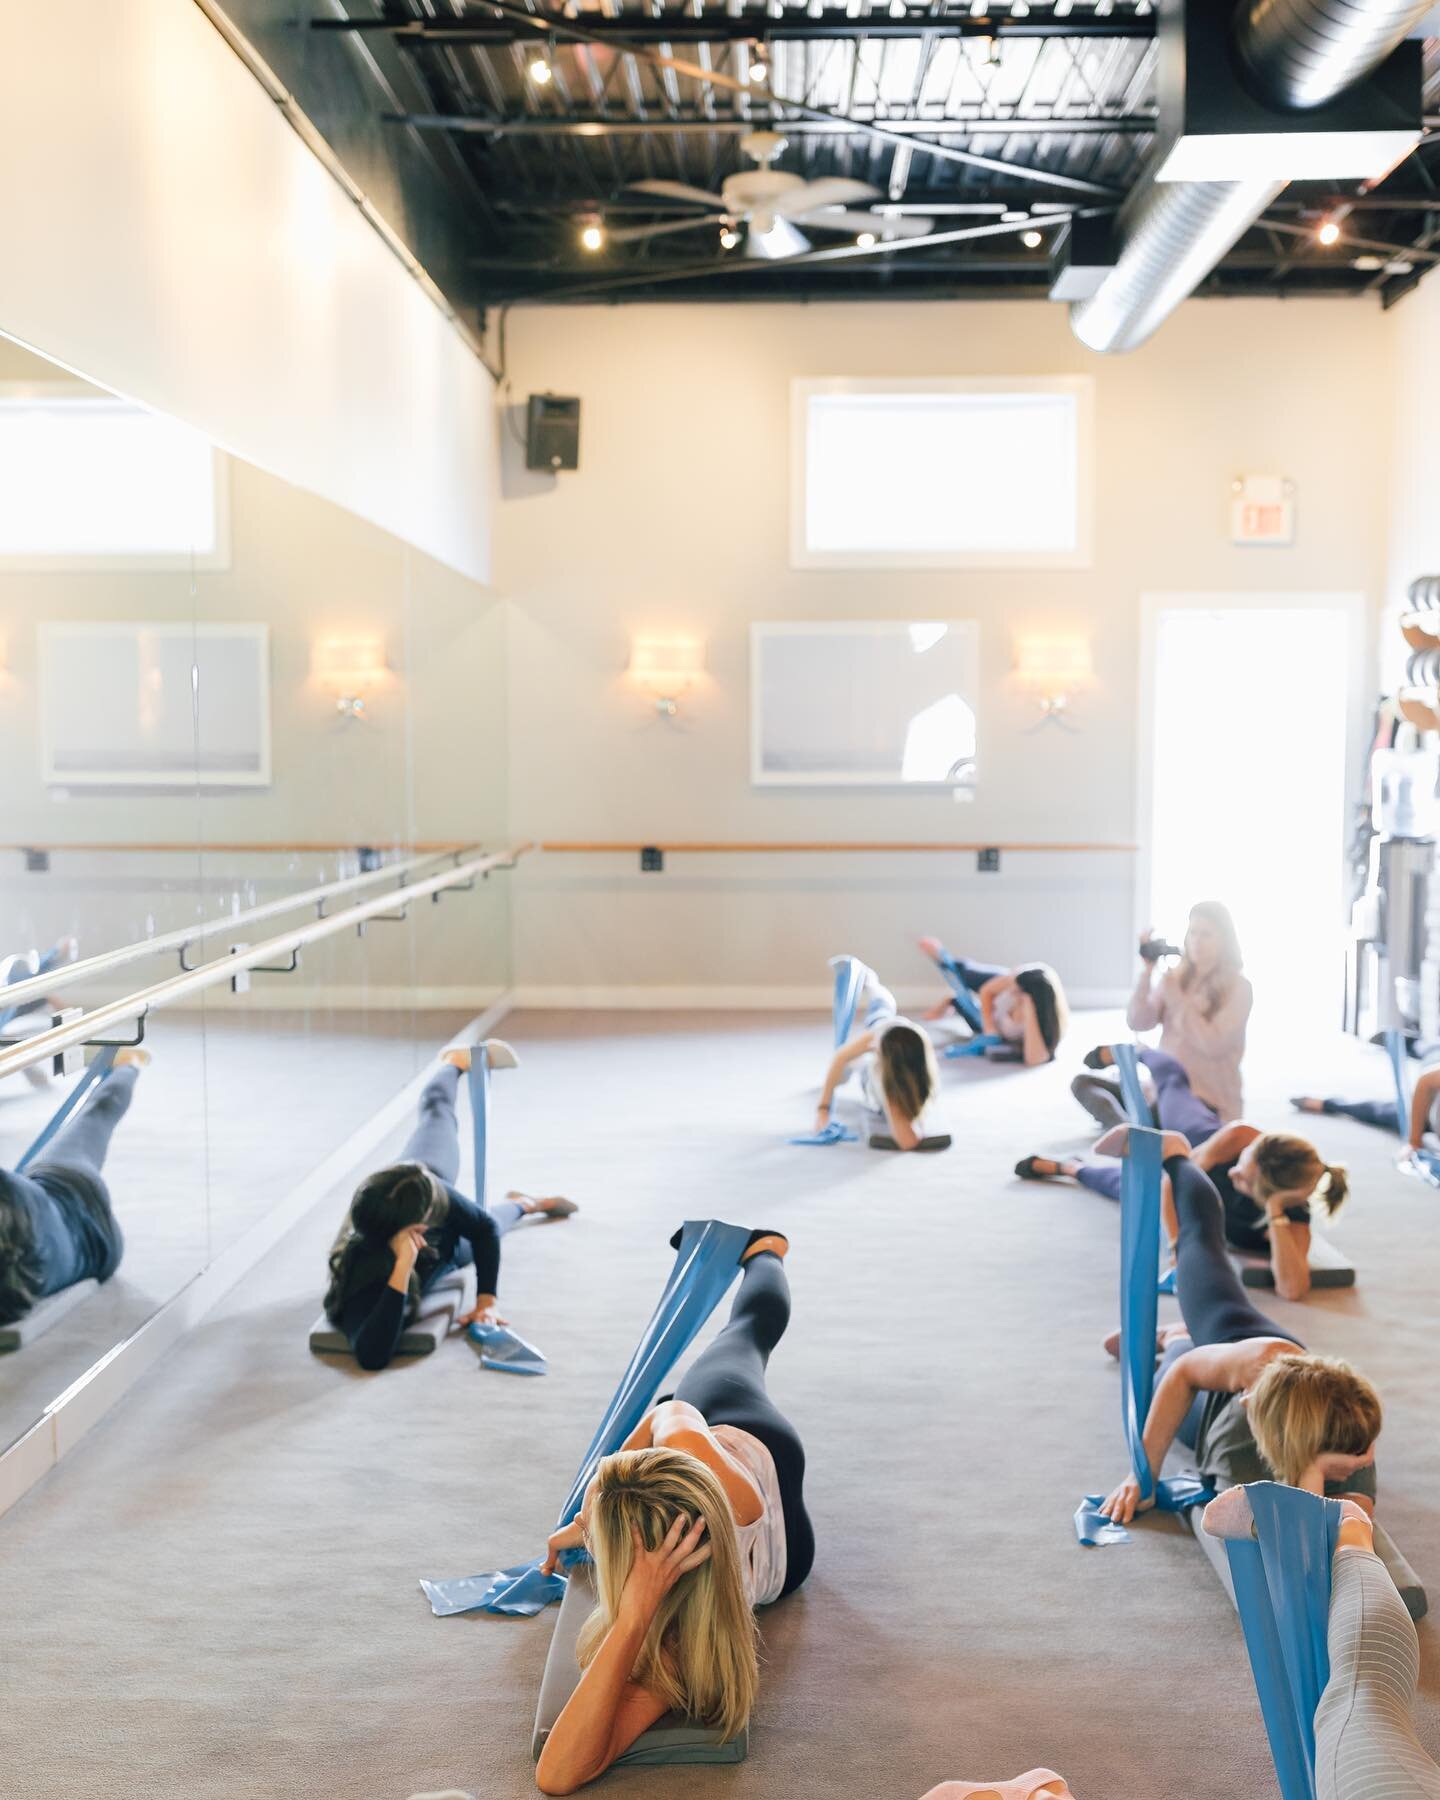 Hey @classpass goers, don't miss out on good #barreburn with us! You can now book a Forme Barre class via ClassPass in either our Greenwich or New Canaan locations. 📍
📸 @juliadags 
.
.
.
#formebarre #formebarrefitness #barrefitness #barreclass #cla